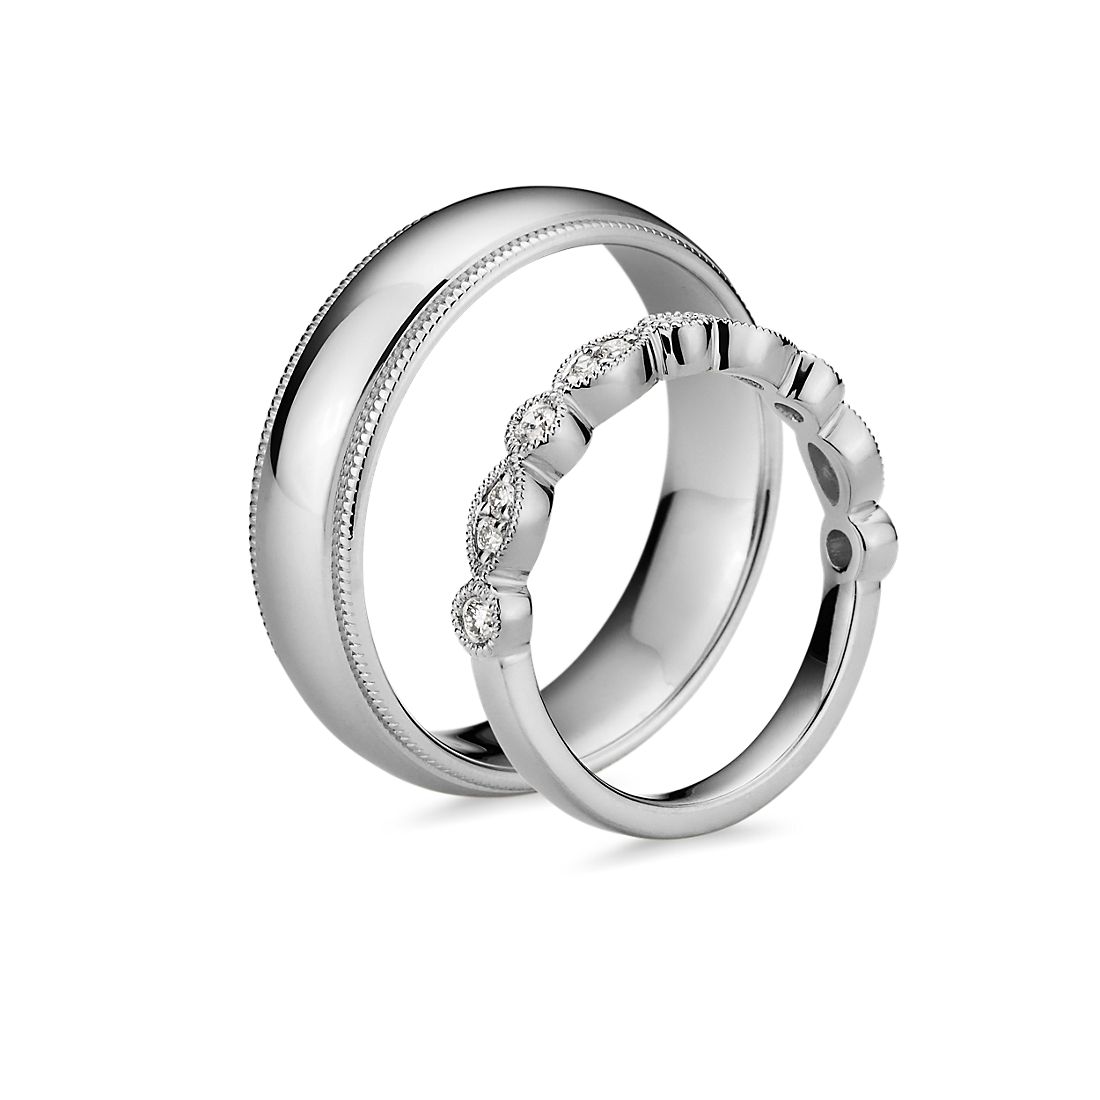 Side profile view of two complementary rings side by side